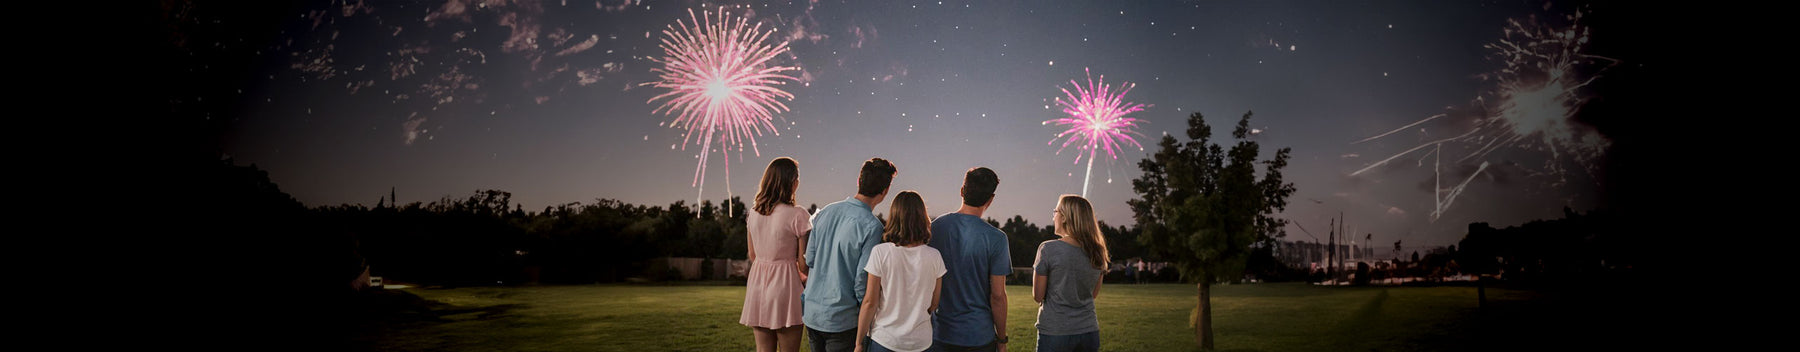 10 Top Tips for Adding Fireworks to Your Gender Reveal